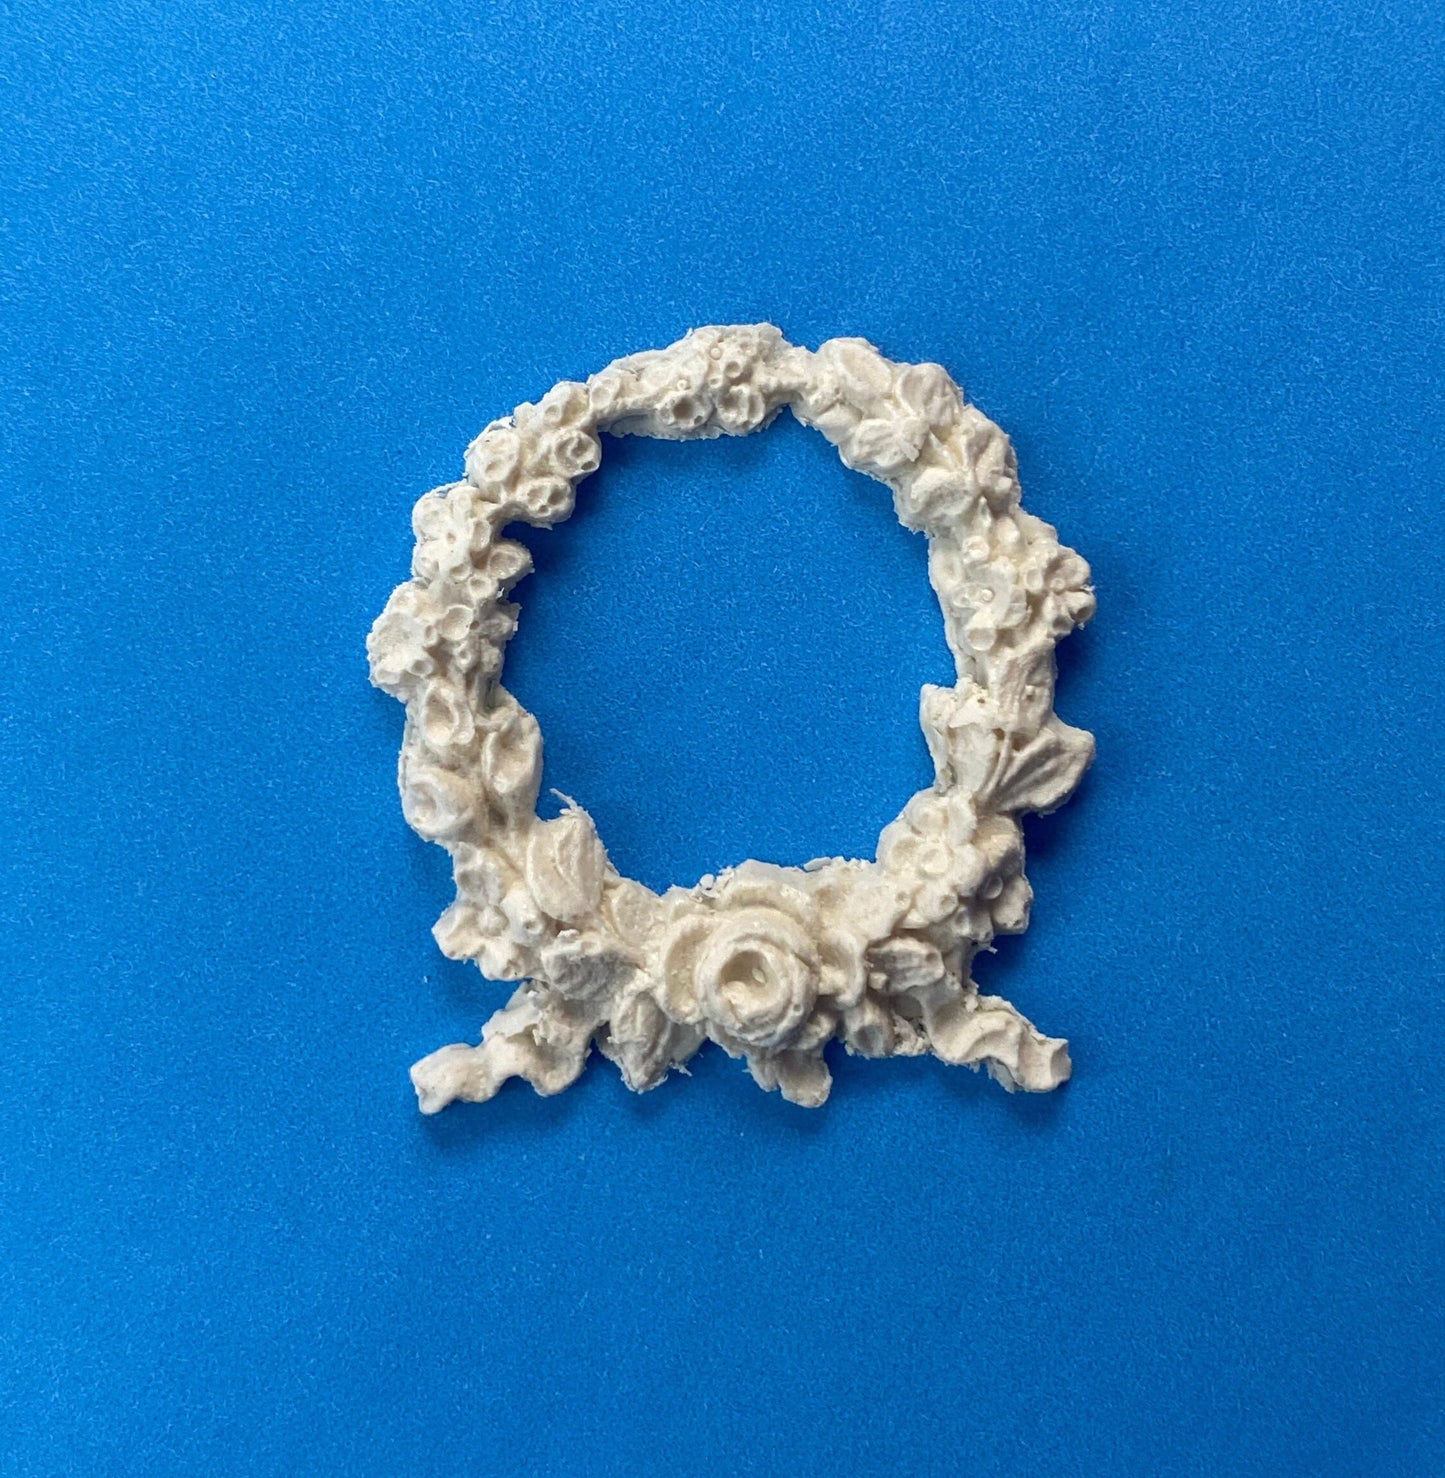 Floral Rose Wreath | Ornamentation for Dollhouse Miniatures | 2 Count